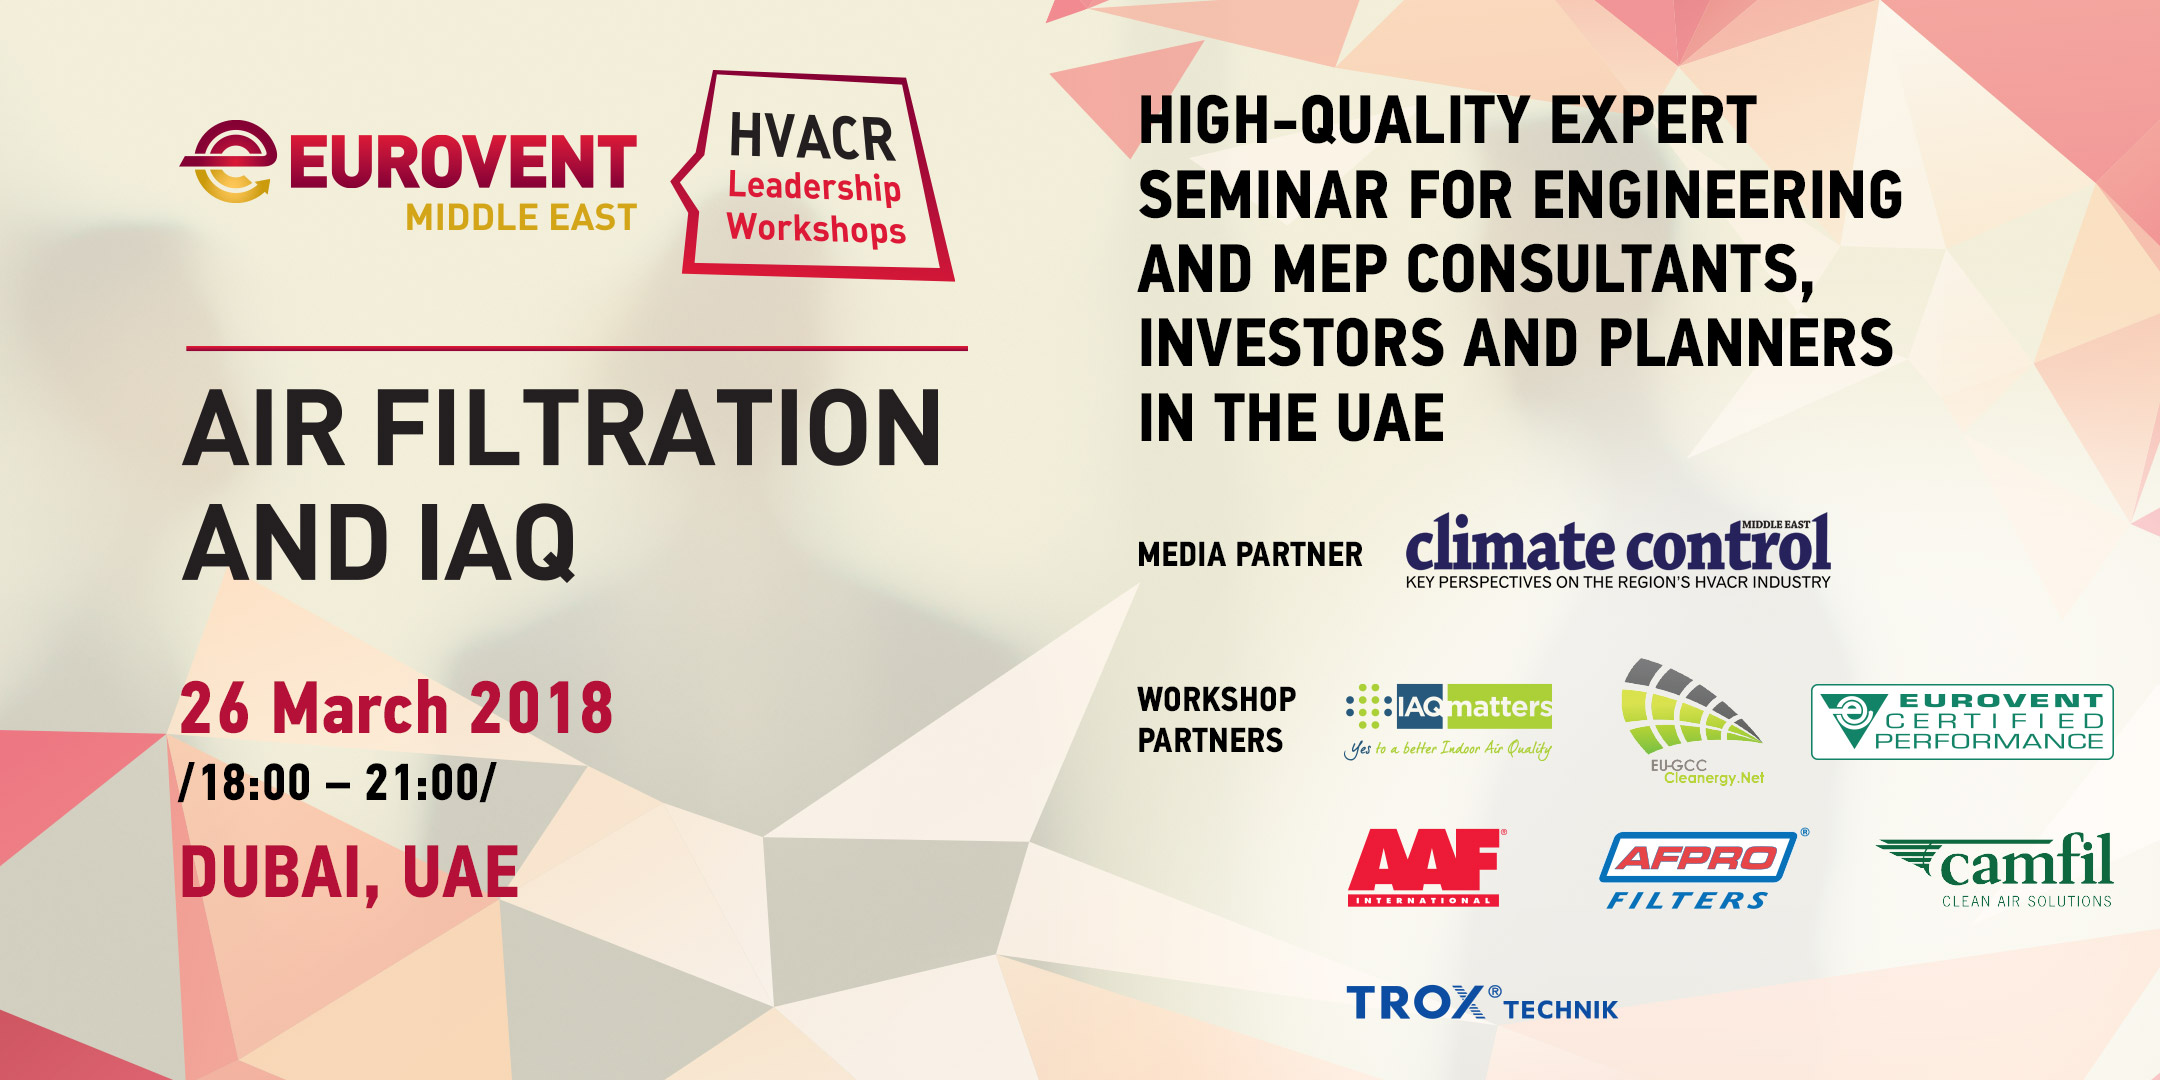 2018 - 'HVACR Leadership Workshops' by Eurovent Middle East - Air Filtration and Indoor Air Quality